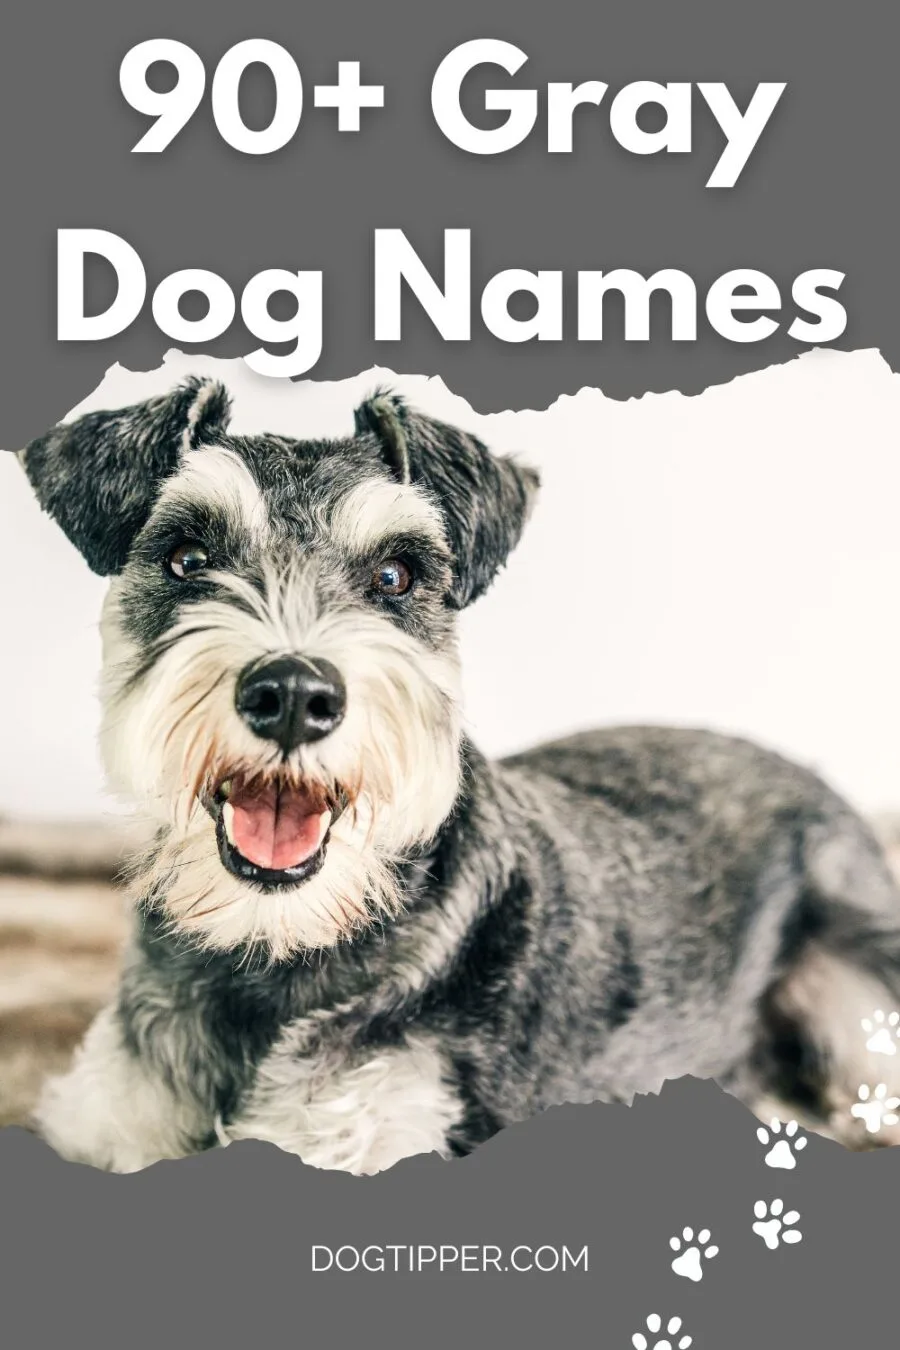 90+ Dog Names for Your Silver Puppy! #dogs #dognames